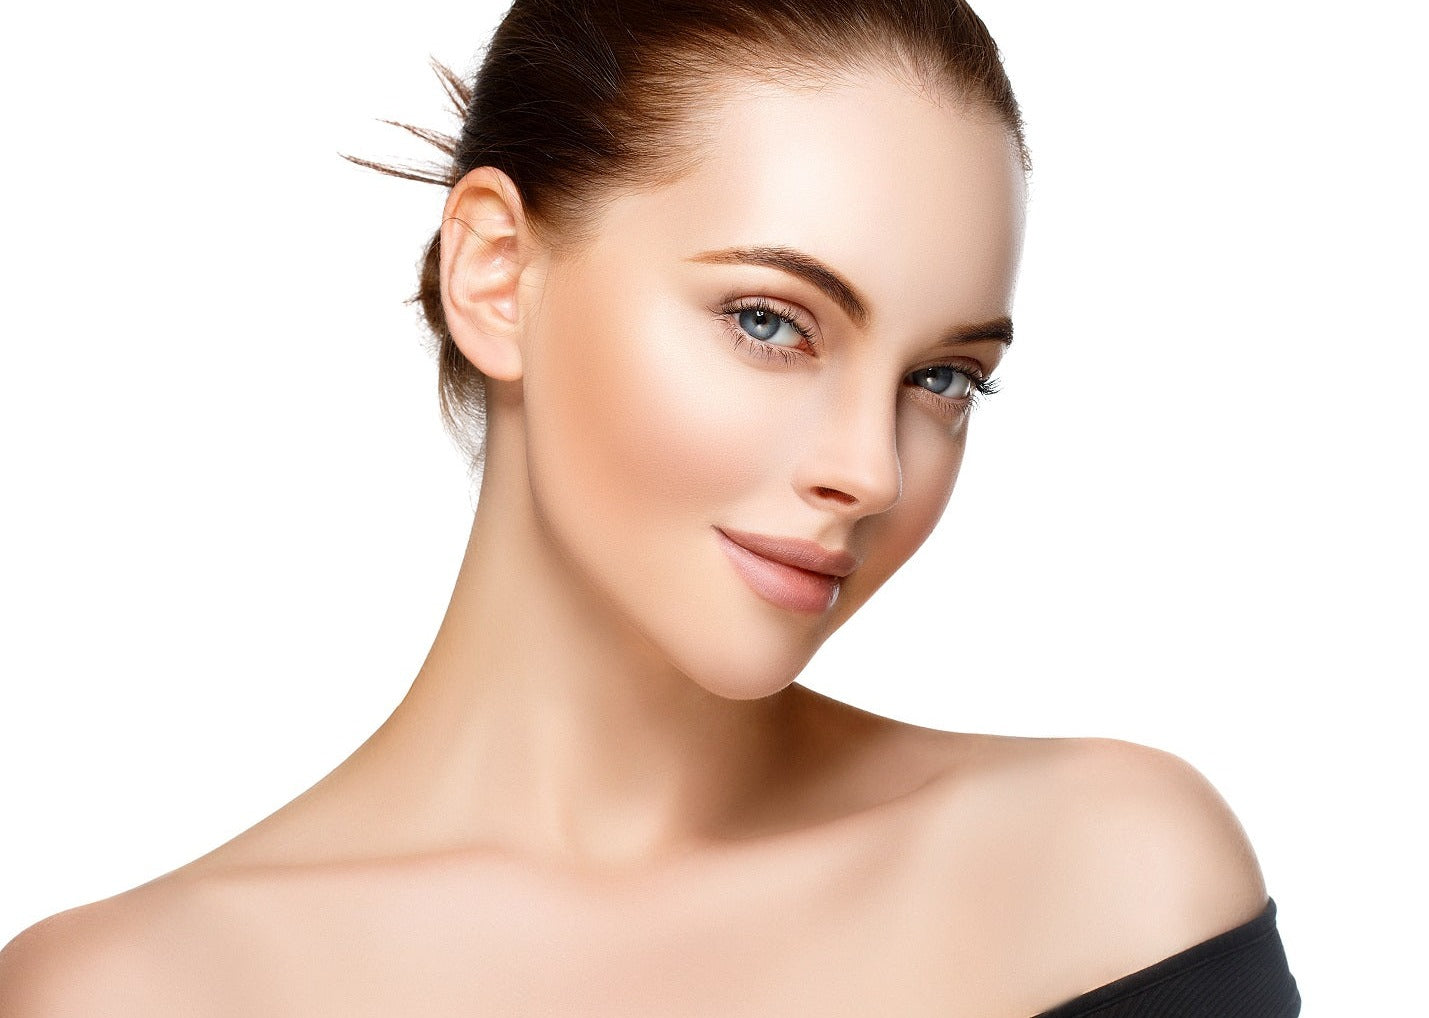 Ultimate Facial Aesthetics Package: Anti-Wrinkle, Lip Filler 0.5ml, Profhilo & Under Eye Boosters (save €496)